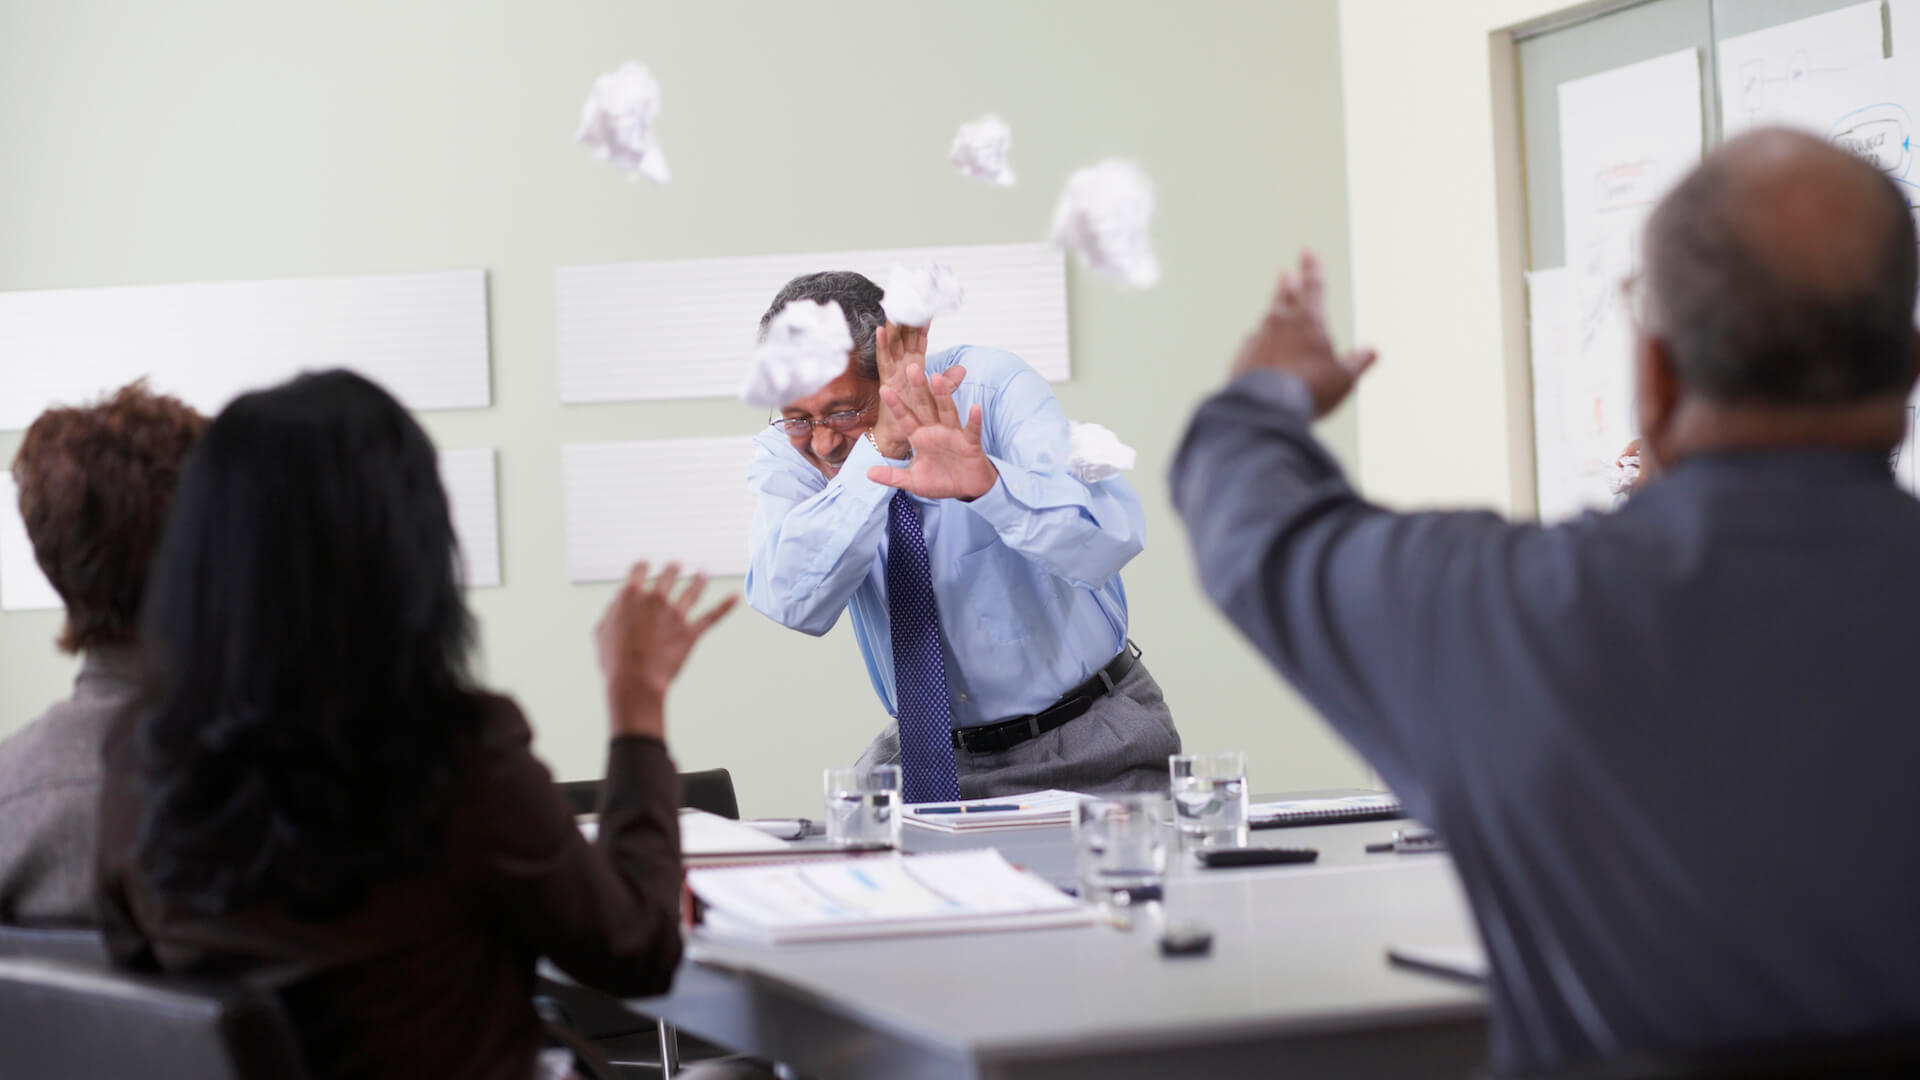 throwing-trash-at-coworker-conflict-management